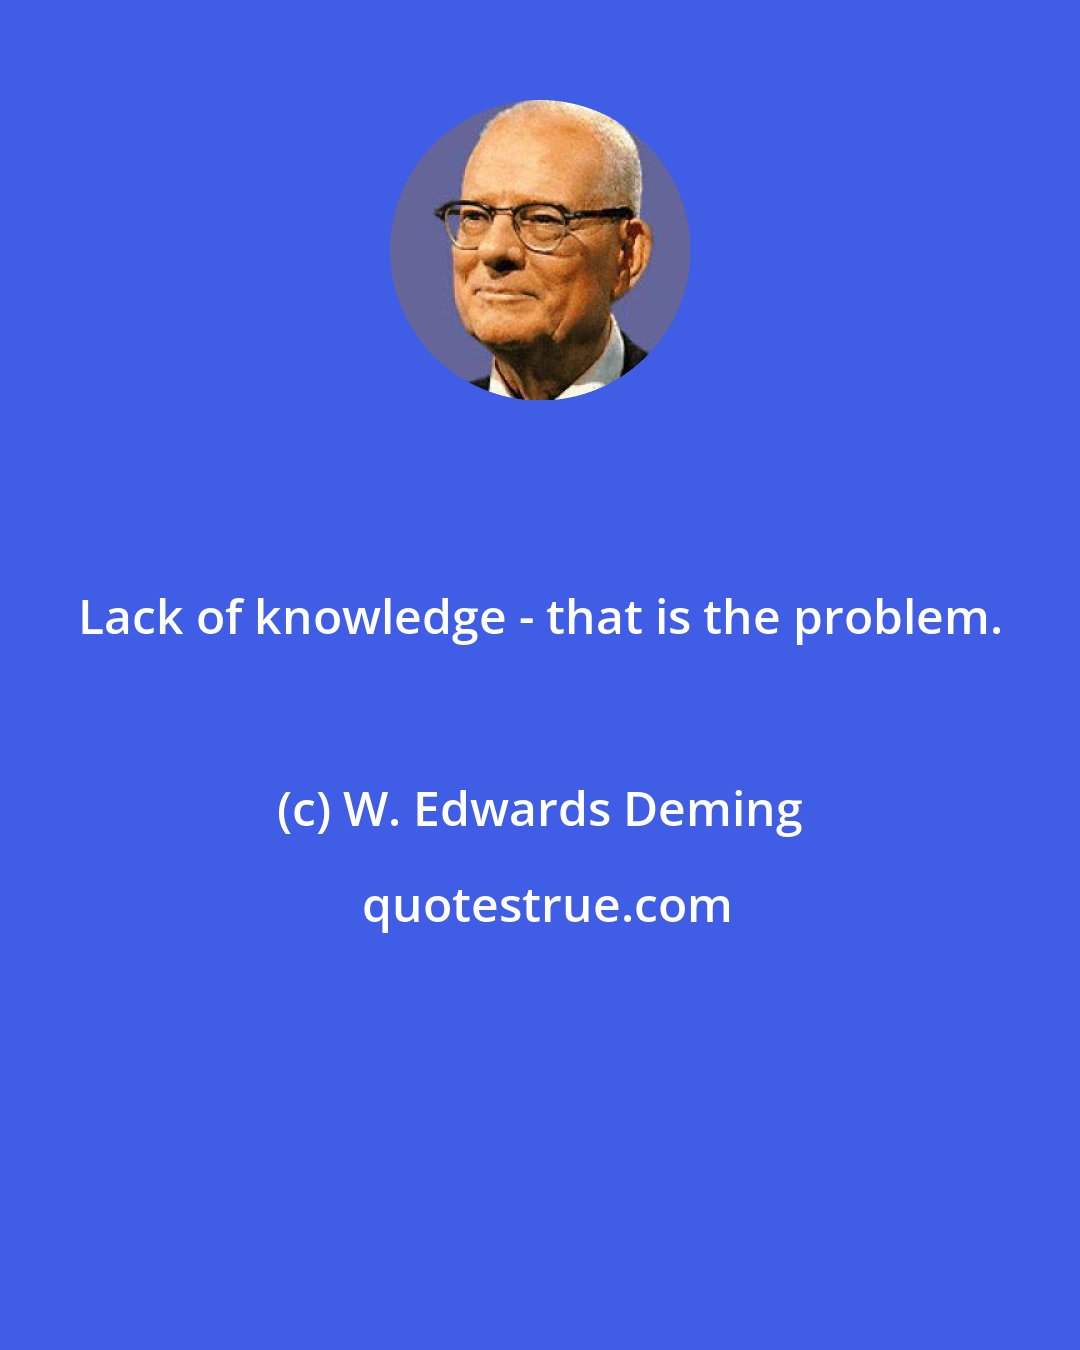 W. Edwards Deming: Lack of knowledge - that is the problem.